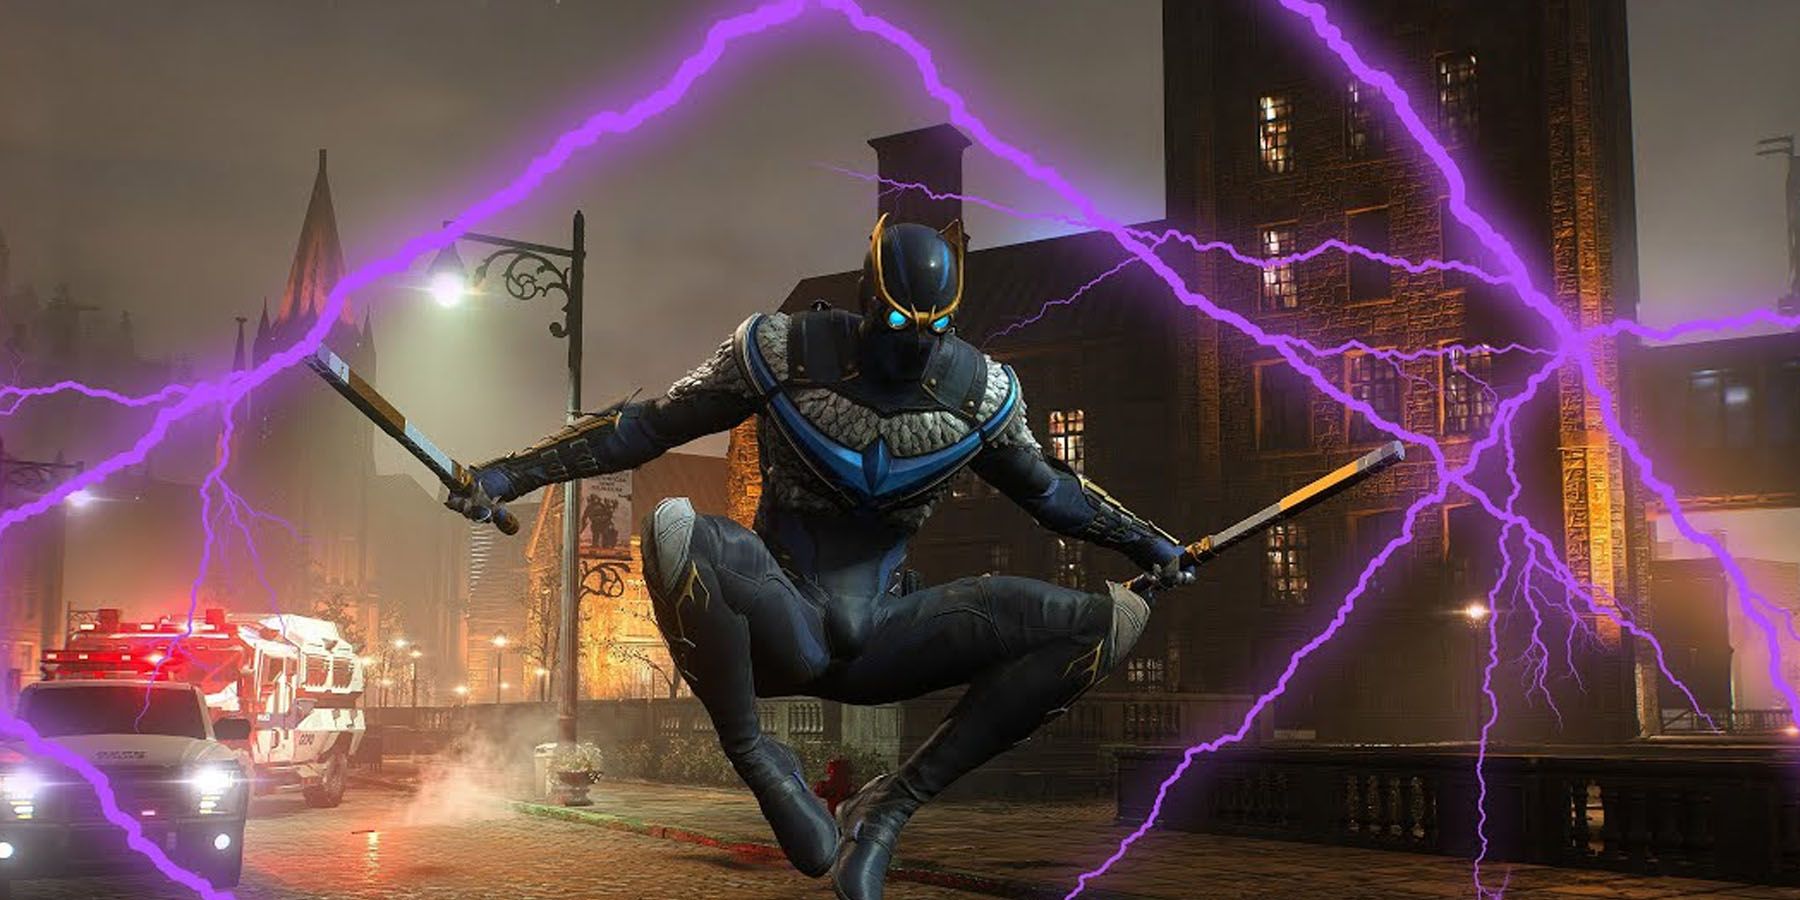 Nightwing doing an attack